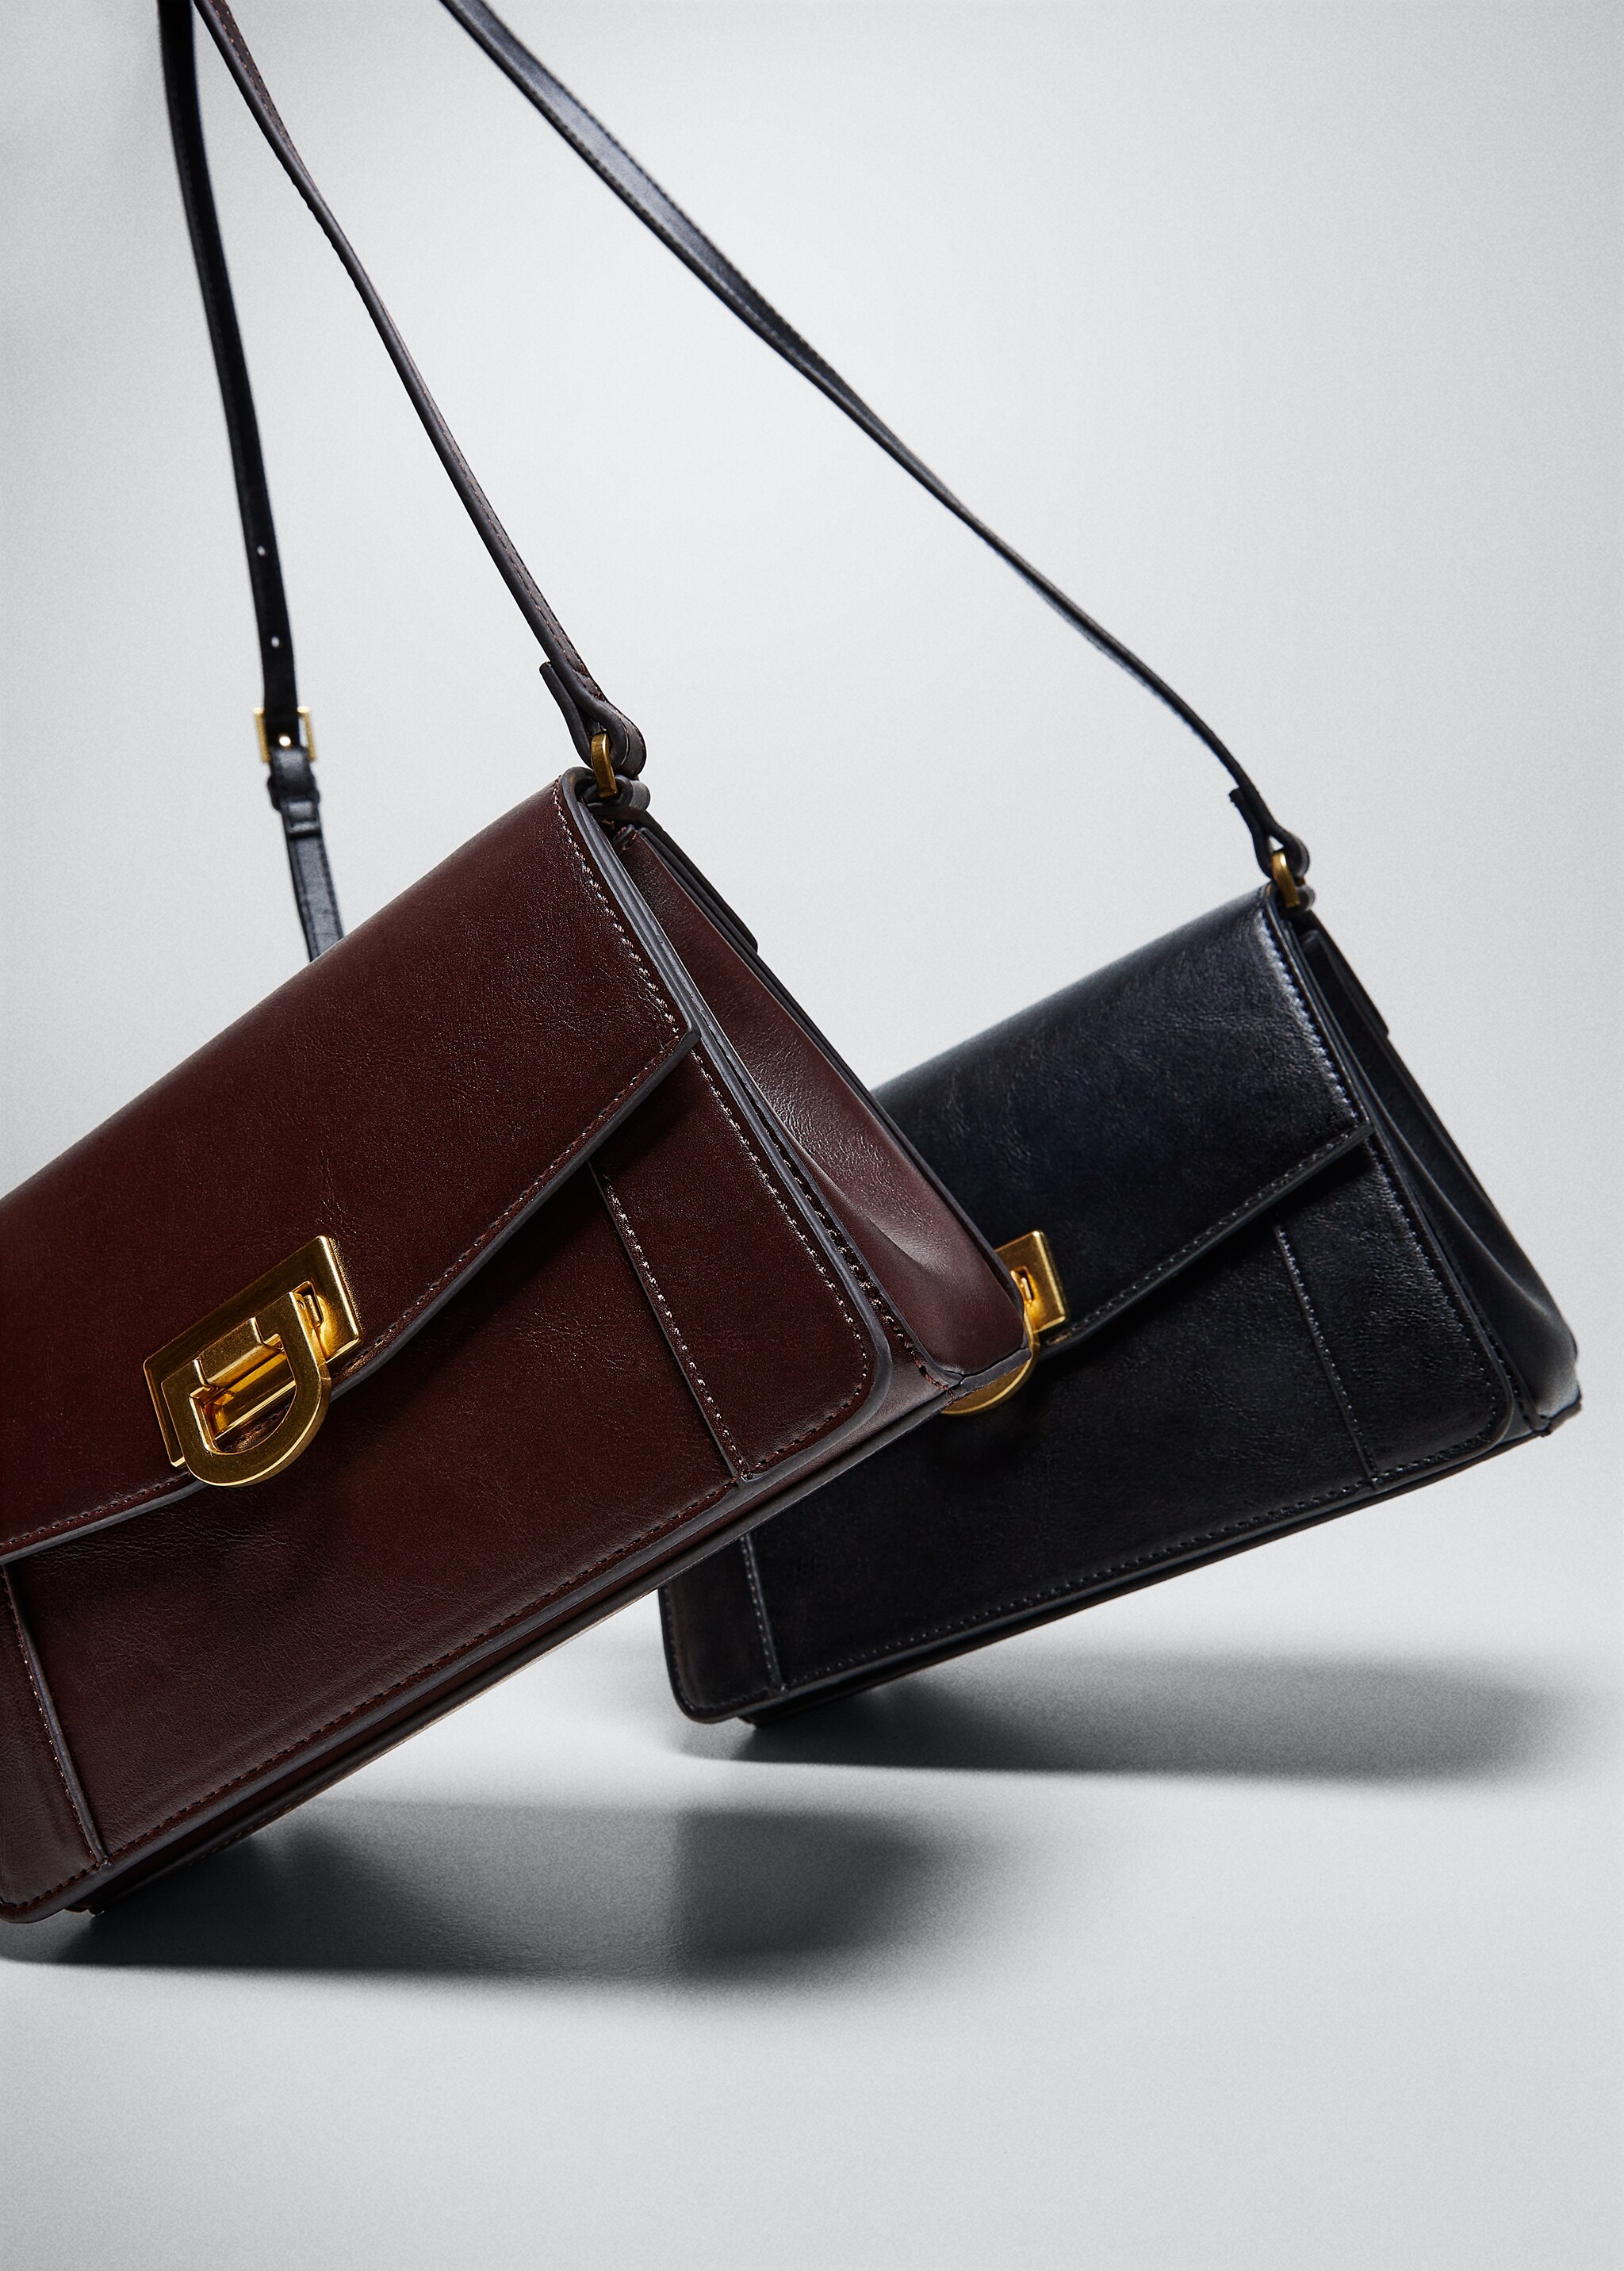 Long strap bag - Details of the article 5